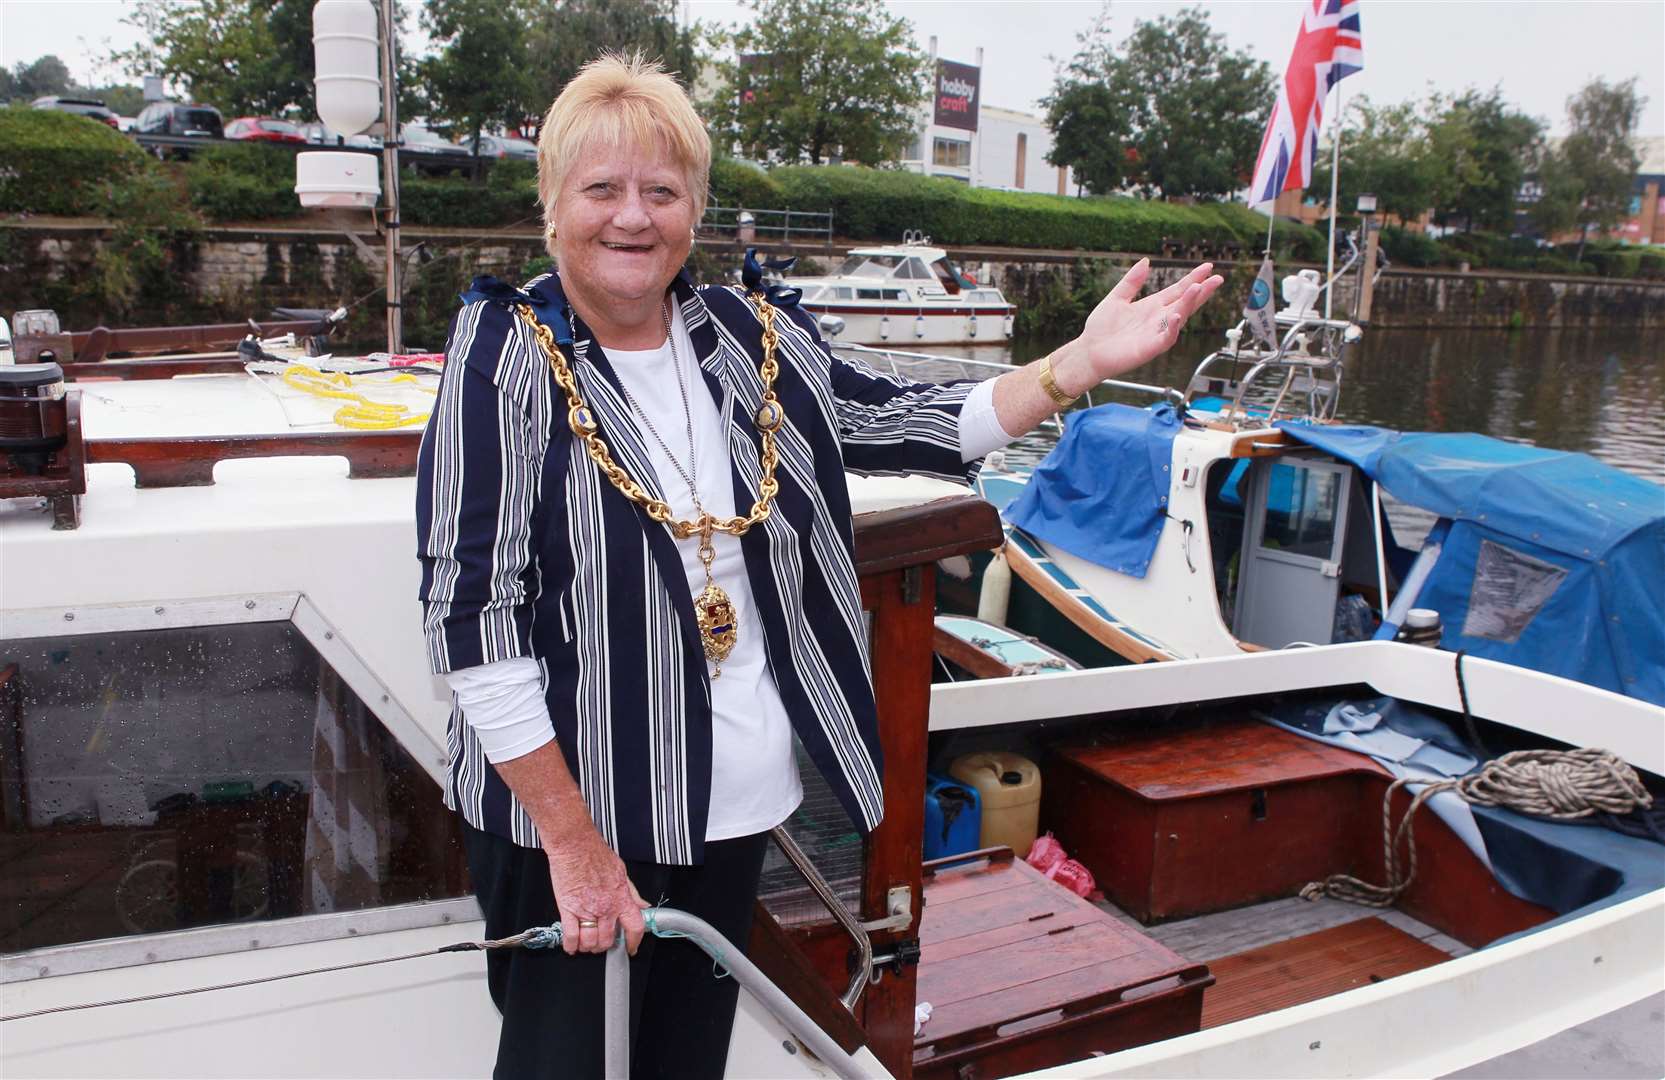 Marion Ring, as Mayor, visiting the Maidstone River Festival